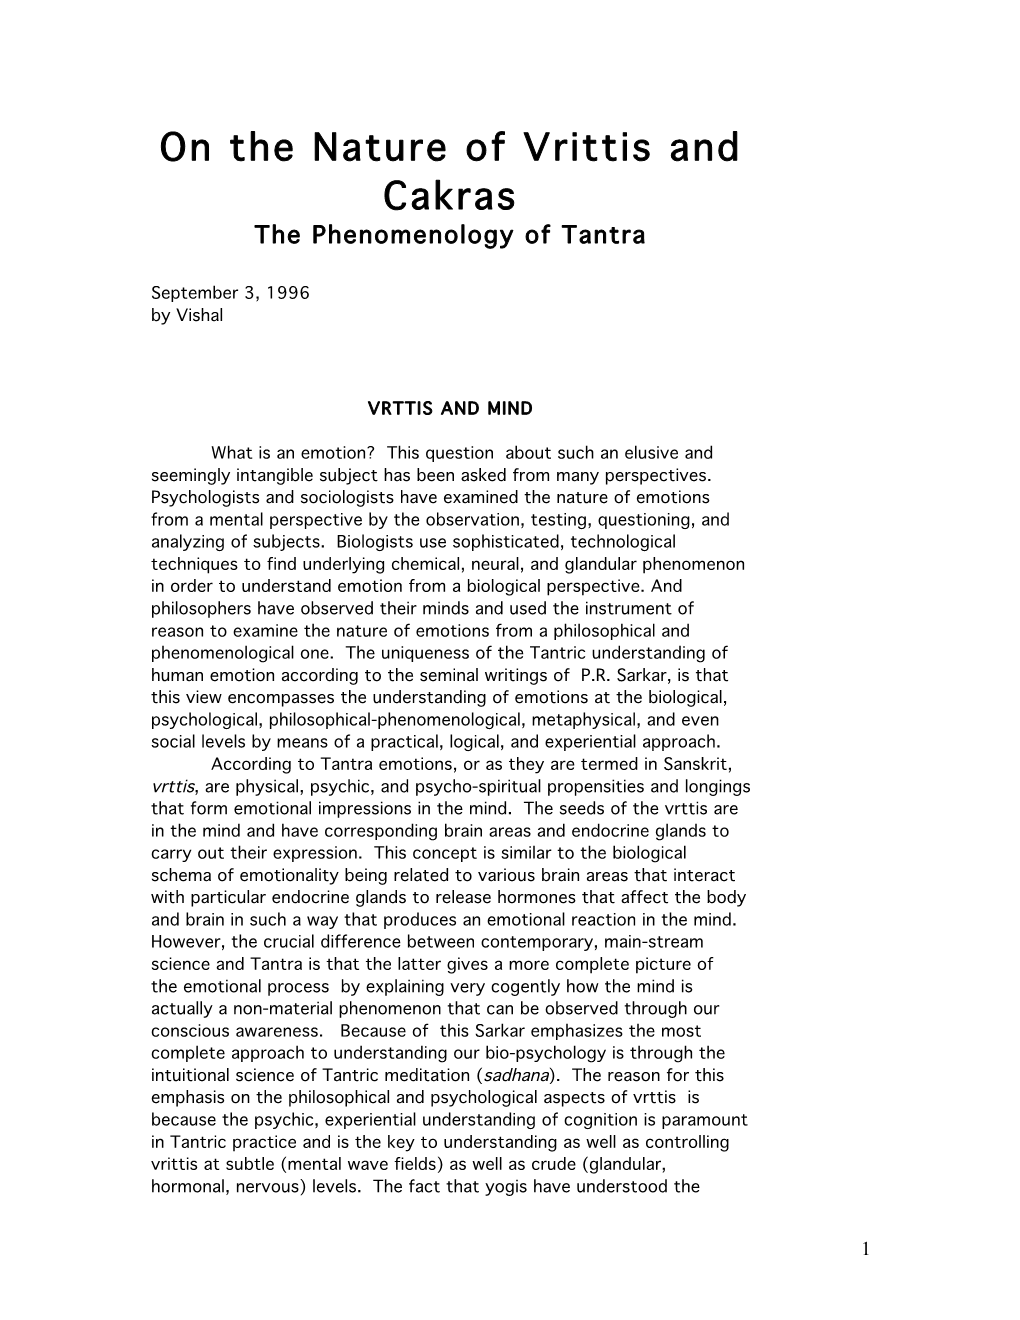 On the Nature of Vrttis and Cakras